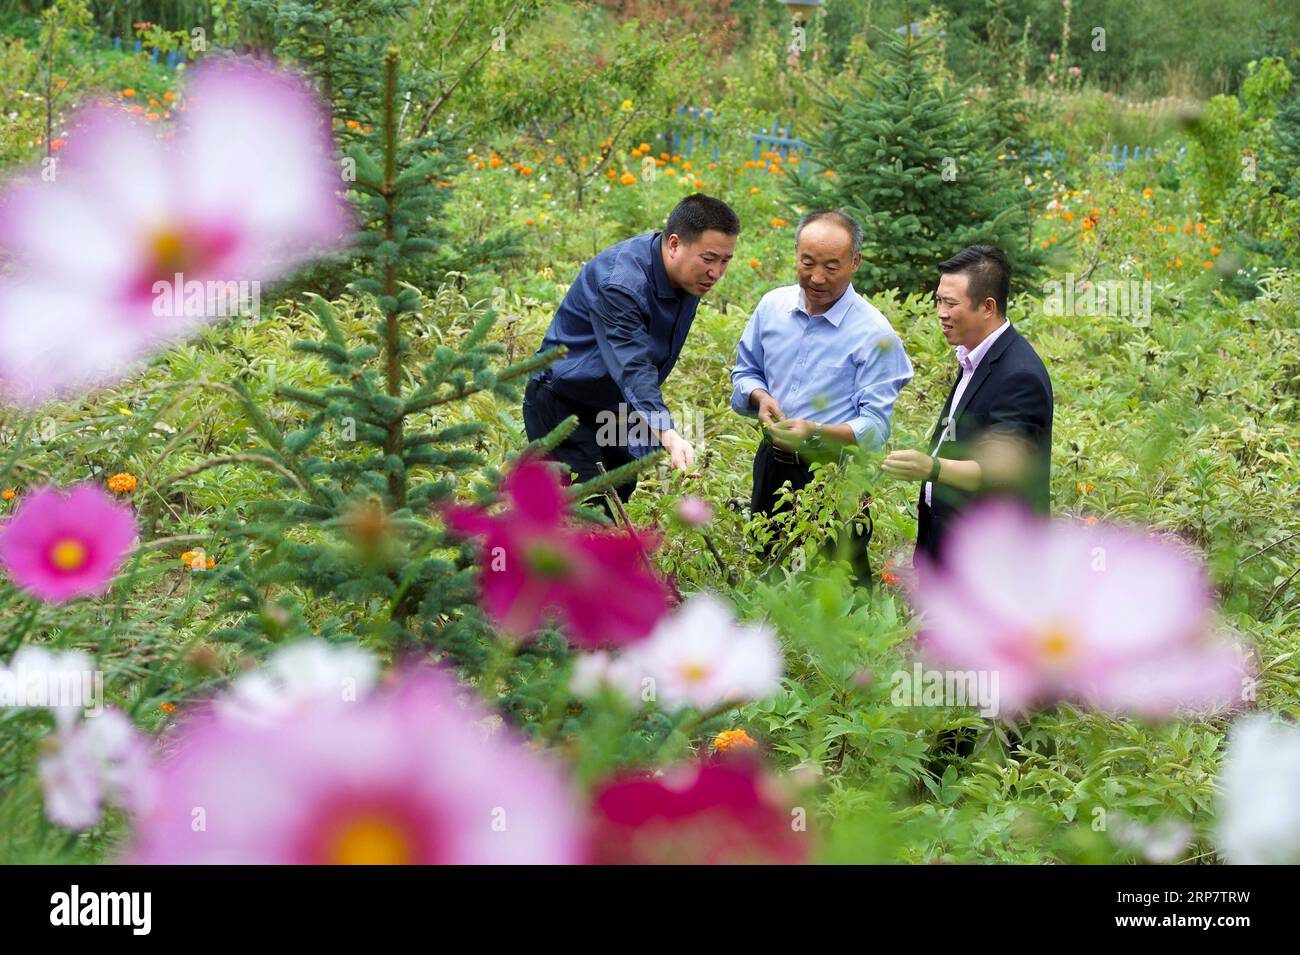 (190212) -- BEIJING, Feb. 12, 2019 (Xinhua) -- An agricultural teacher instructs farmers in planting peony in Longwangba Village of Xiji County in Guyuan, northwest China s Ningxia Hui Autonomous Region, Aug. 30, 2018. China will continue to work vigorously to reduce poverty and lift no less than ten million people out of poverty in 2019, to lay a solid foundation for winning the battle against poverty, the State Council s executive meeting chaired by Premier Li Keqiang decided on Monday. The year 2018 saw China launch its three-year actions in fighting the battle against poverty. Premier Li K Stock Photo